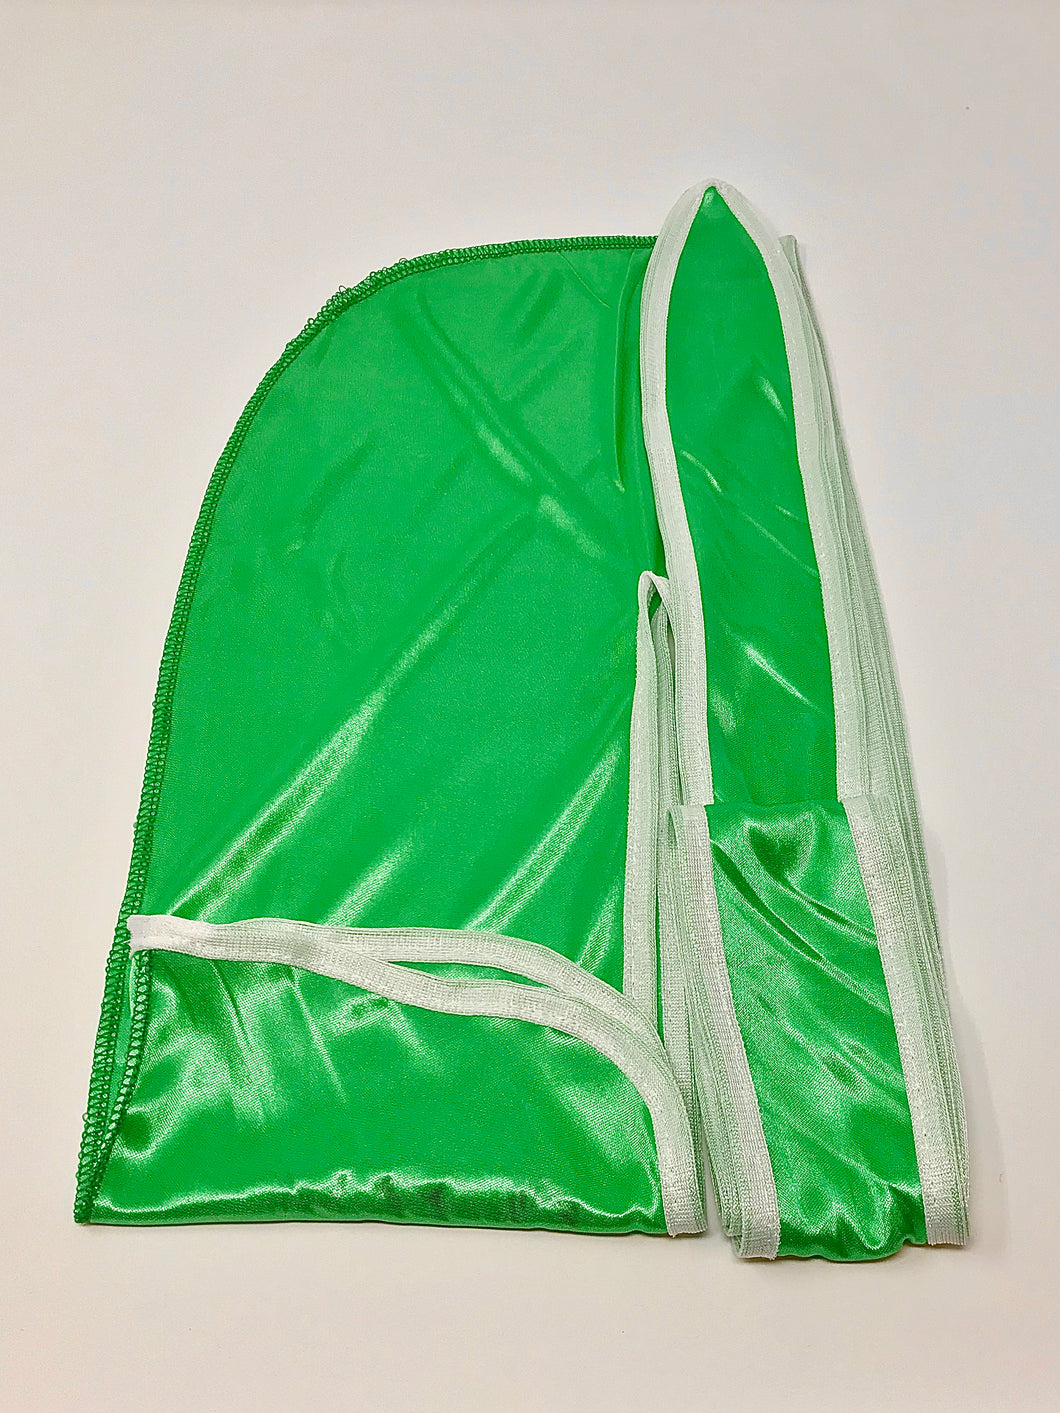 Rimix *PATENT PENDING* Silky Durag **Limited Edition - Green/White Trim